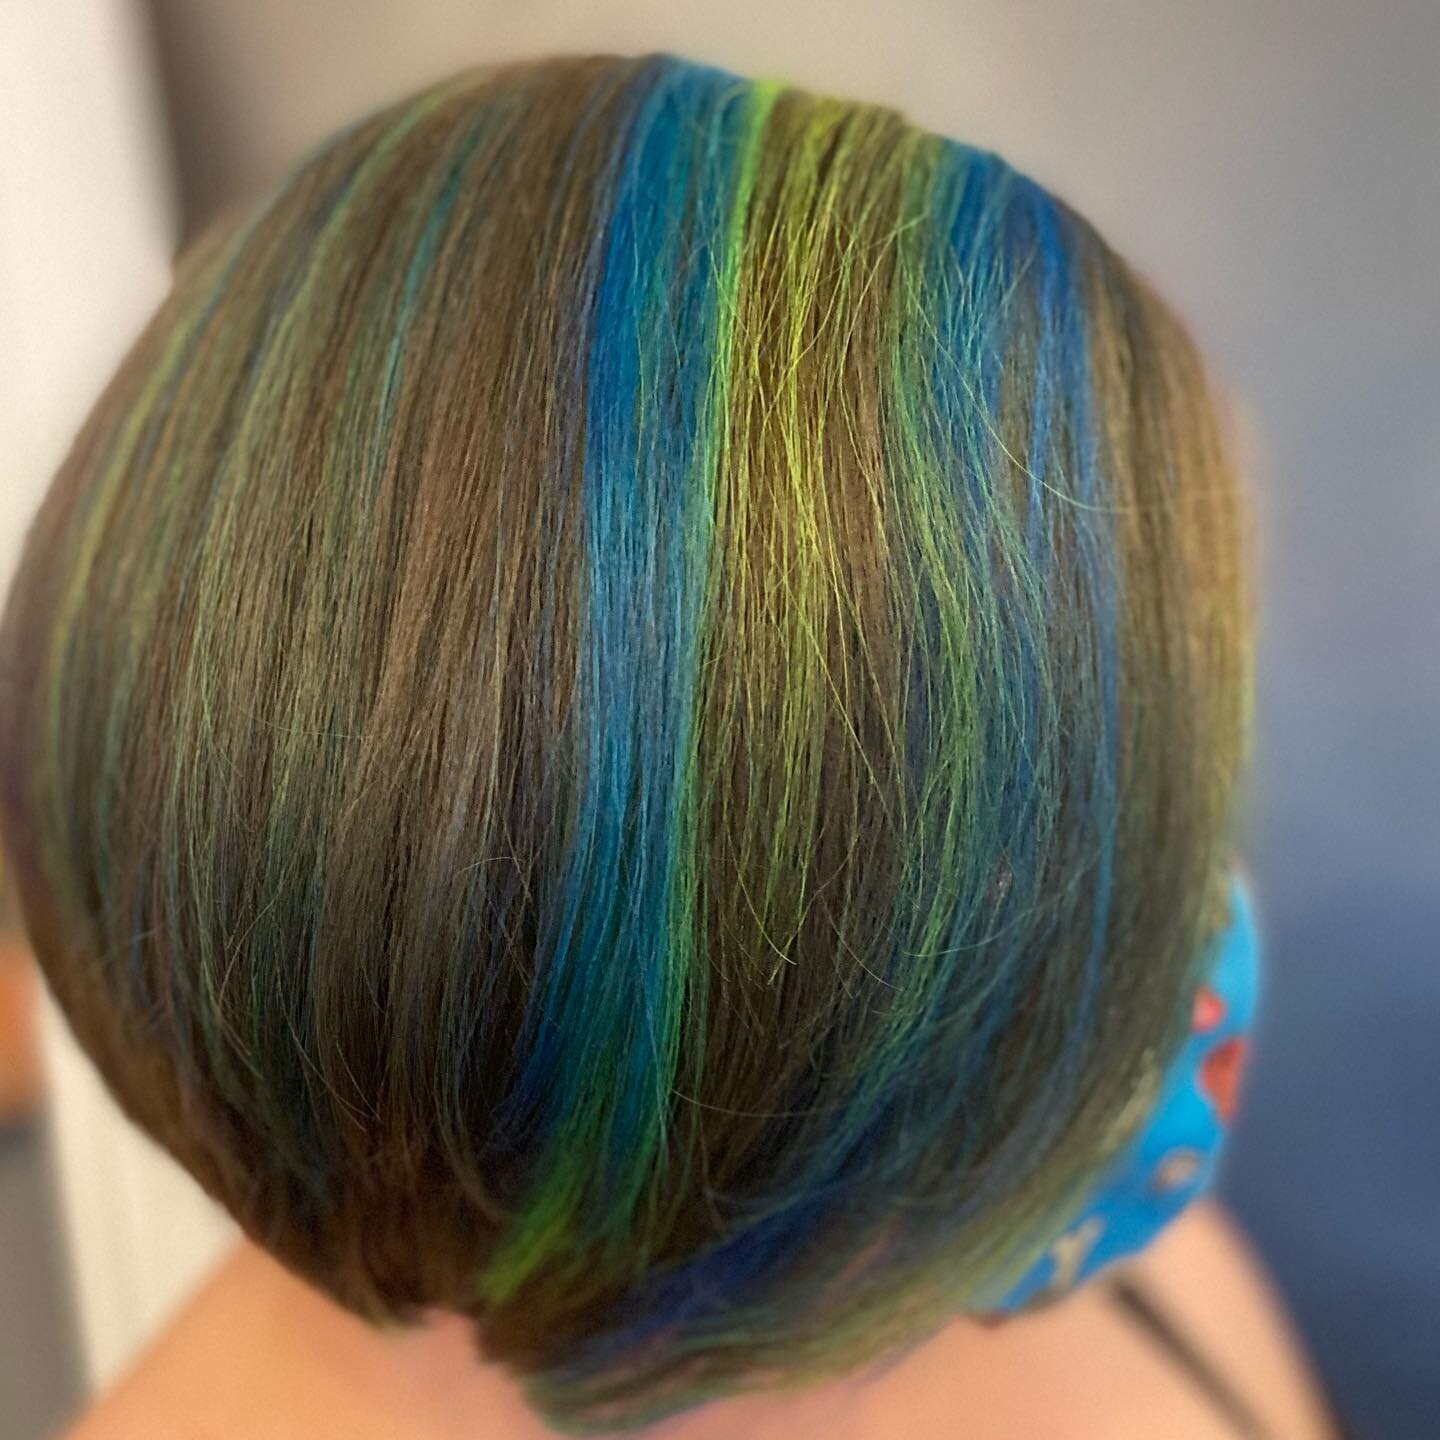 @marie.freese11 sat in my chair and said &ldquo;I want more bold&rdquo; and so I had to deliver. Swipe to see the surprise hiding underneath. 
🐌
🐌
🐌
#evo #evostaino #vividcolors #bobhaircut #surprise #midwestbeautyhouse #betterbeautyculture